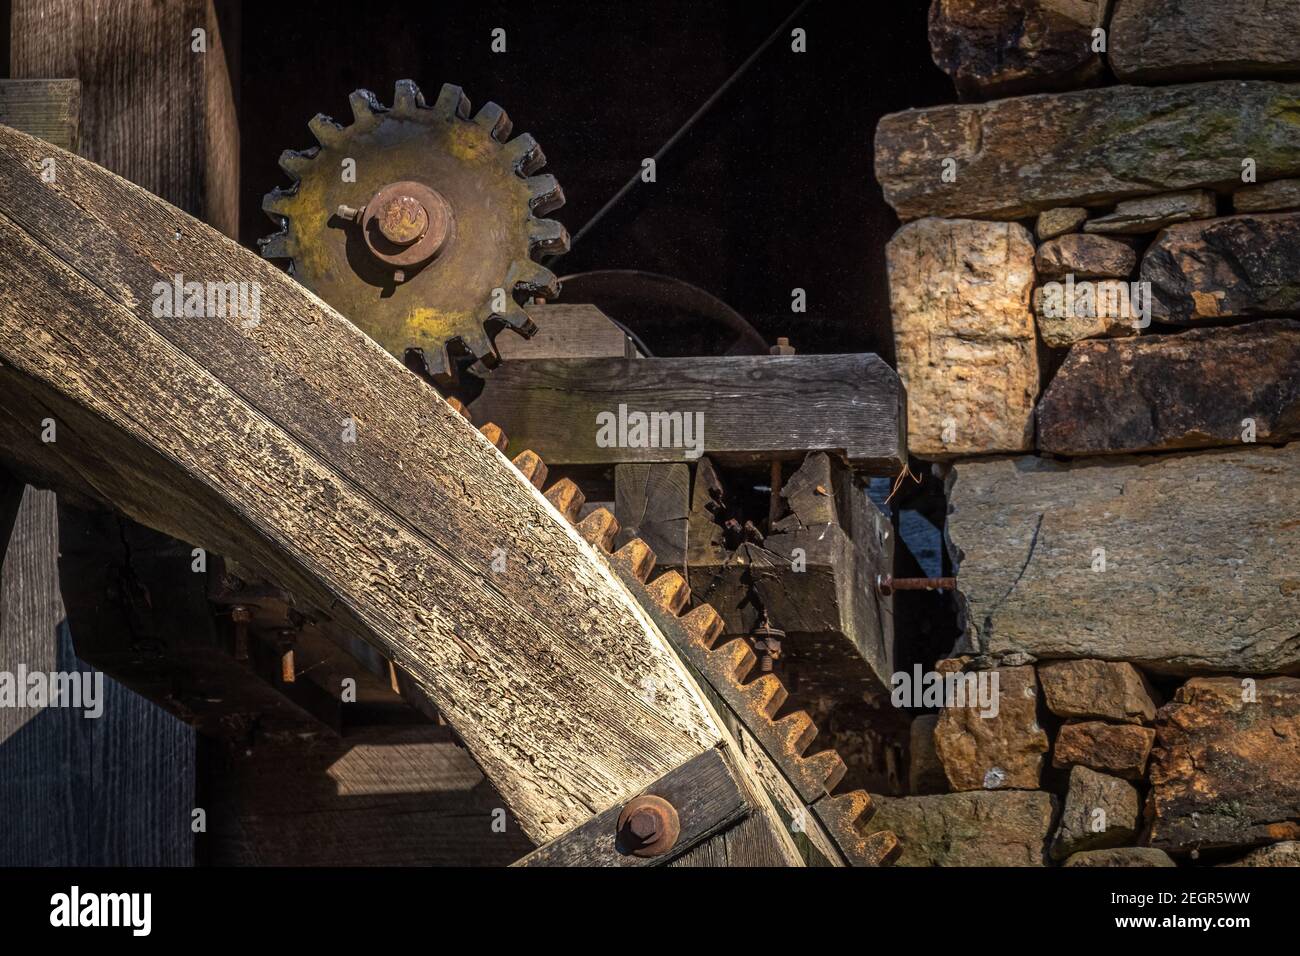 Closeup of the pinion gear driven by the waterwheel of the old grist mill at Historic Yates Mill County Park in Raleigh, North Carolina. Stock Photo